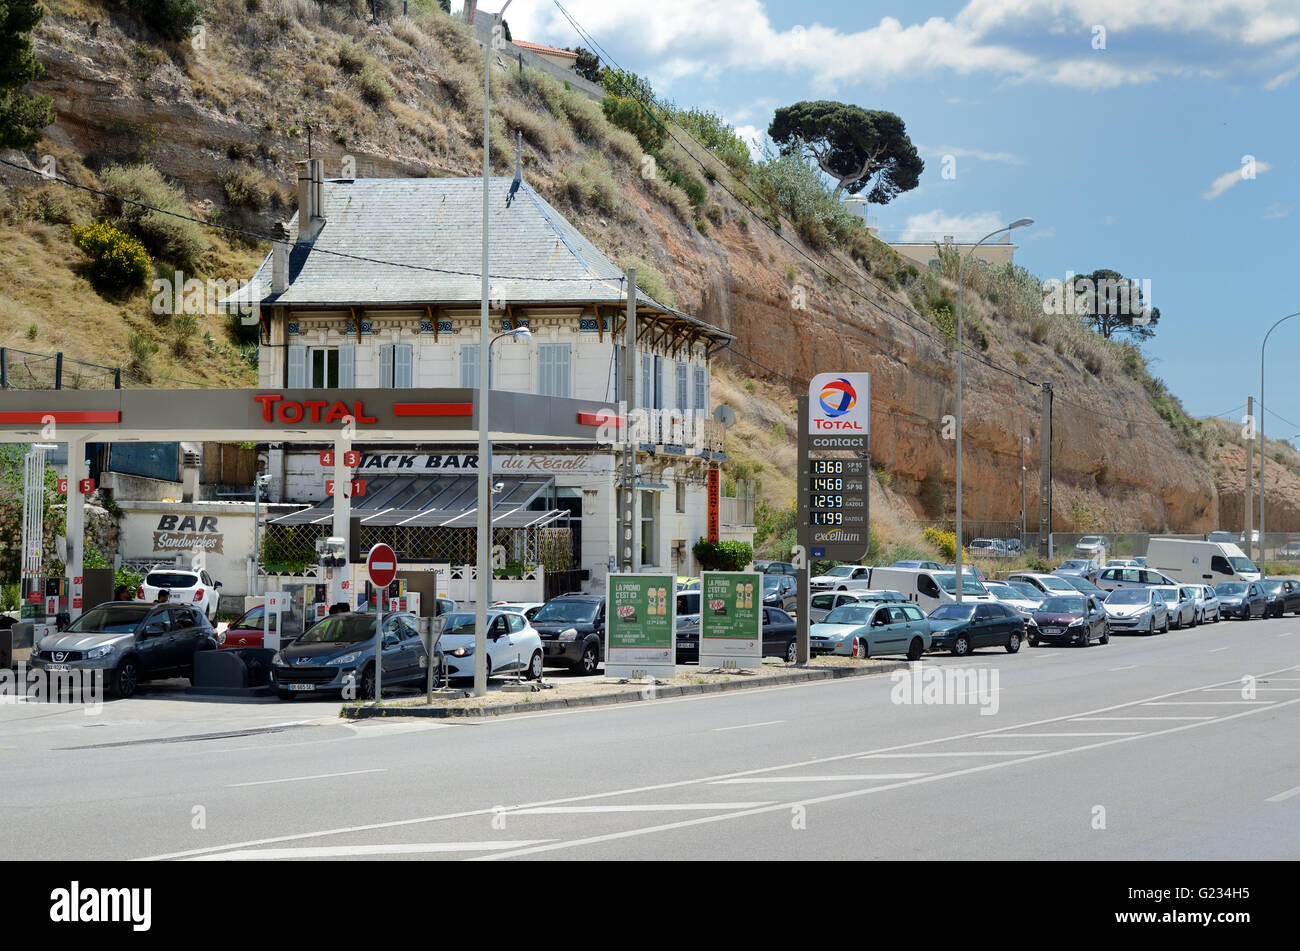 Marseille, France. 23rd May, 2016. Motorists Queue for Petrol in France. Strikes at key oil refineries in France, by workers opposed to government labour reforms, have led to petrol shortages, panic and extensive queues at petrol stations. Image photographed in Marseille, France. Credit:  Chris Hellier/Alamy Live News Stock Photo